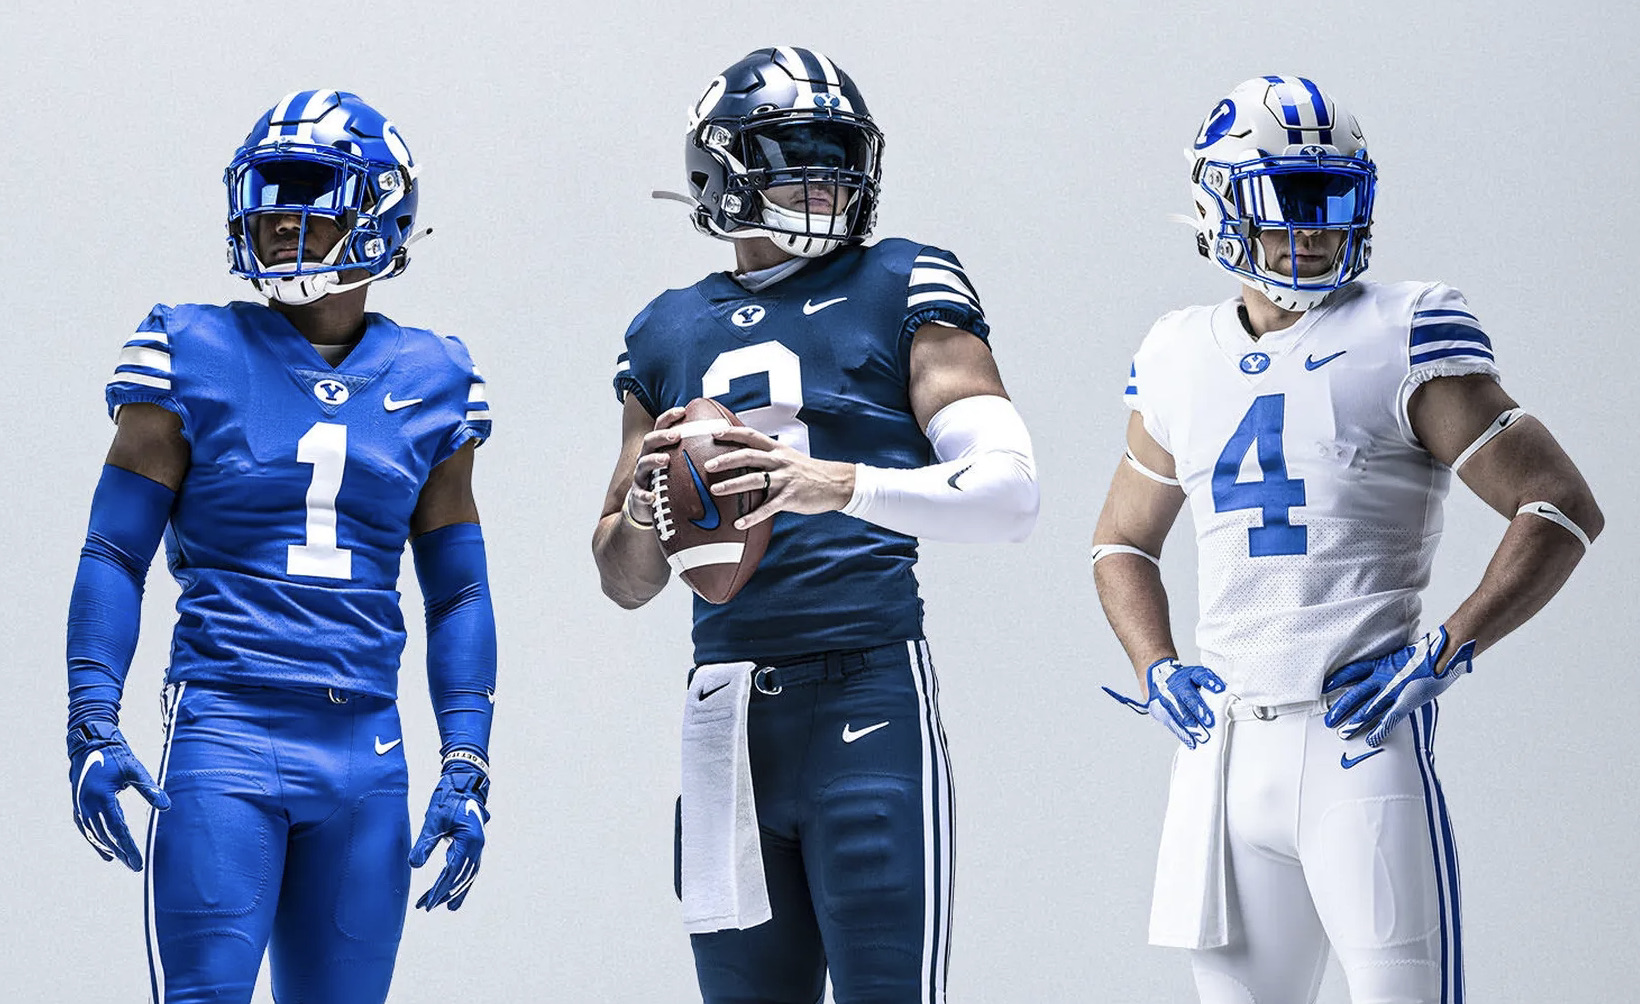 BYU's new football uniforms for 2021